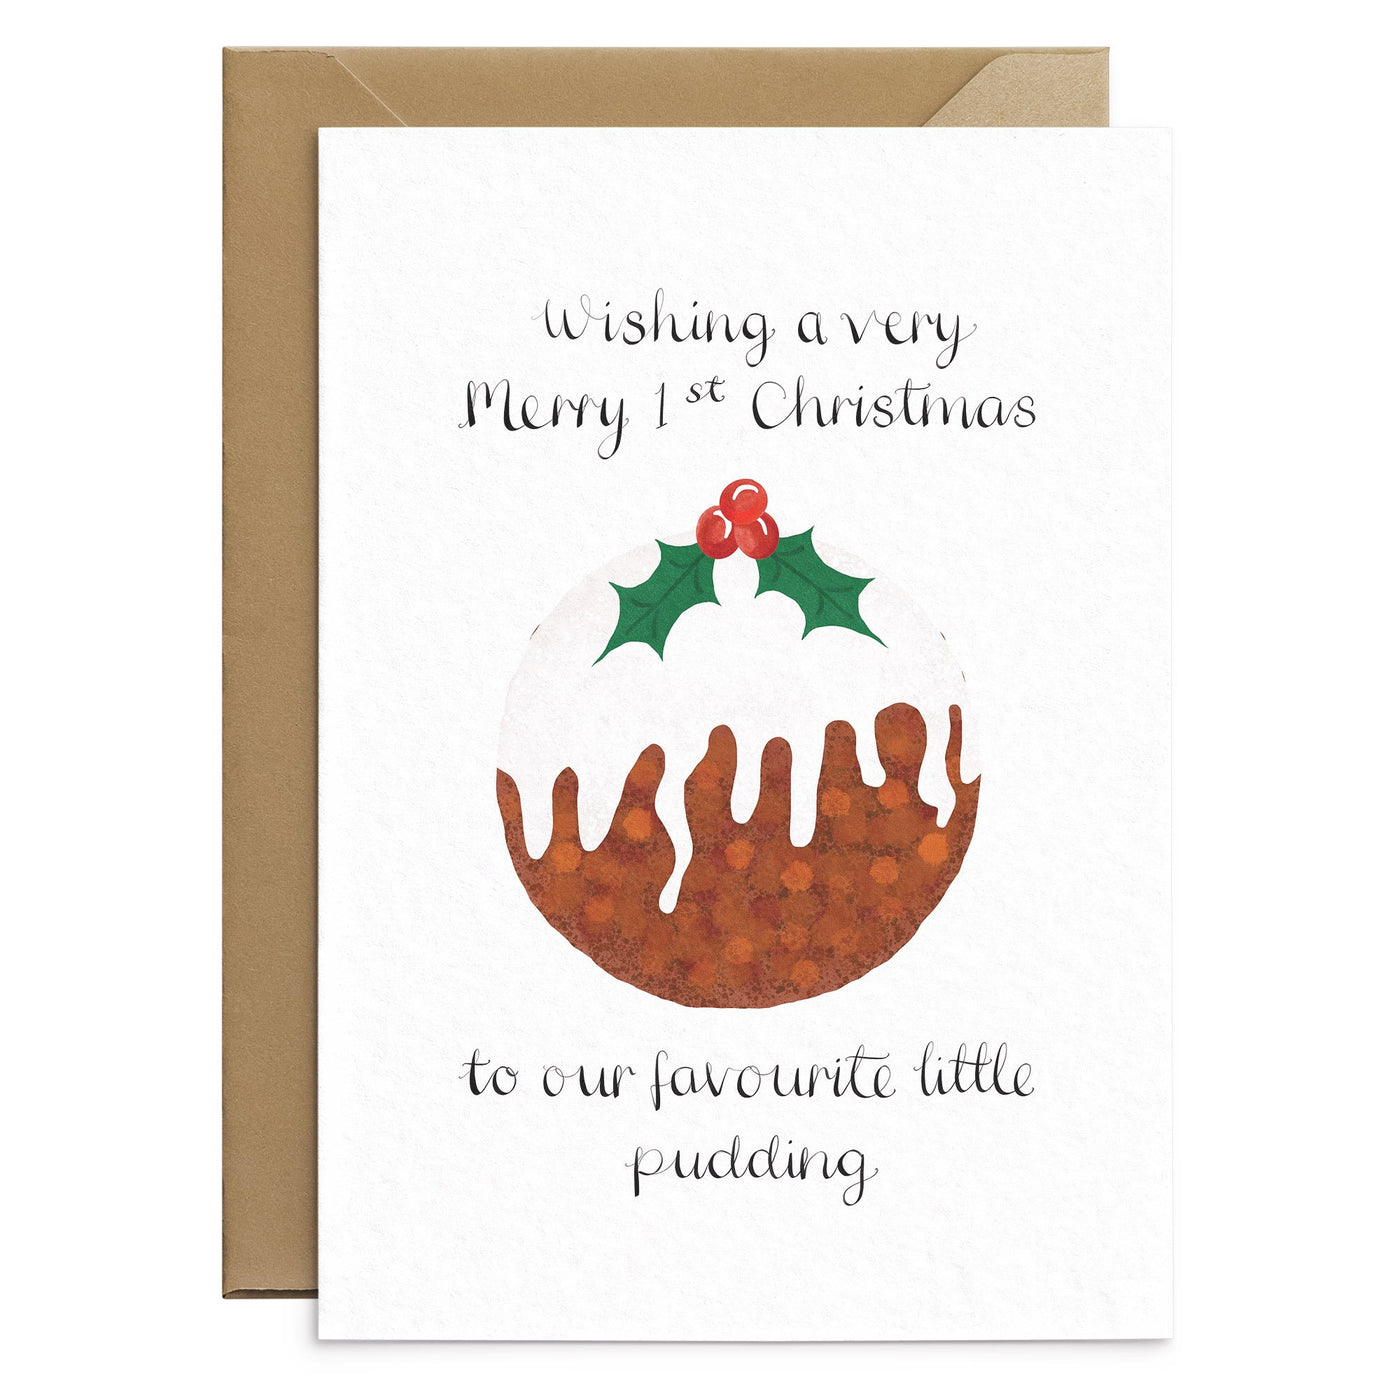 Our Little Pudding 1st Christmas Card